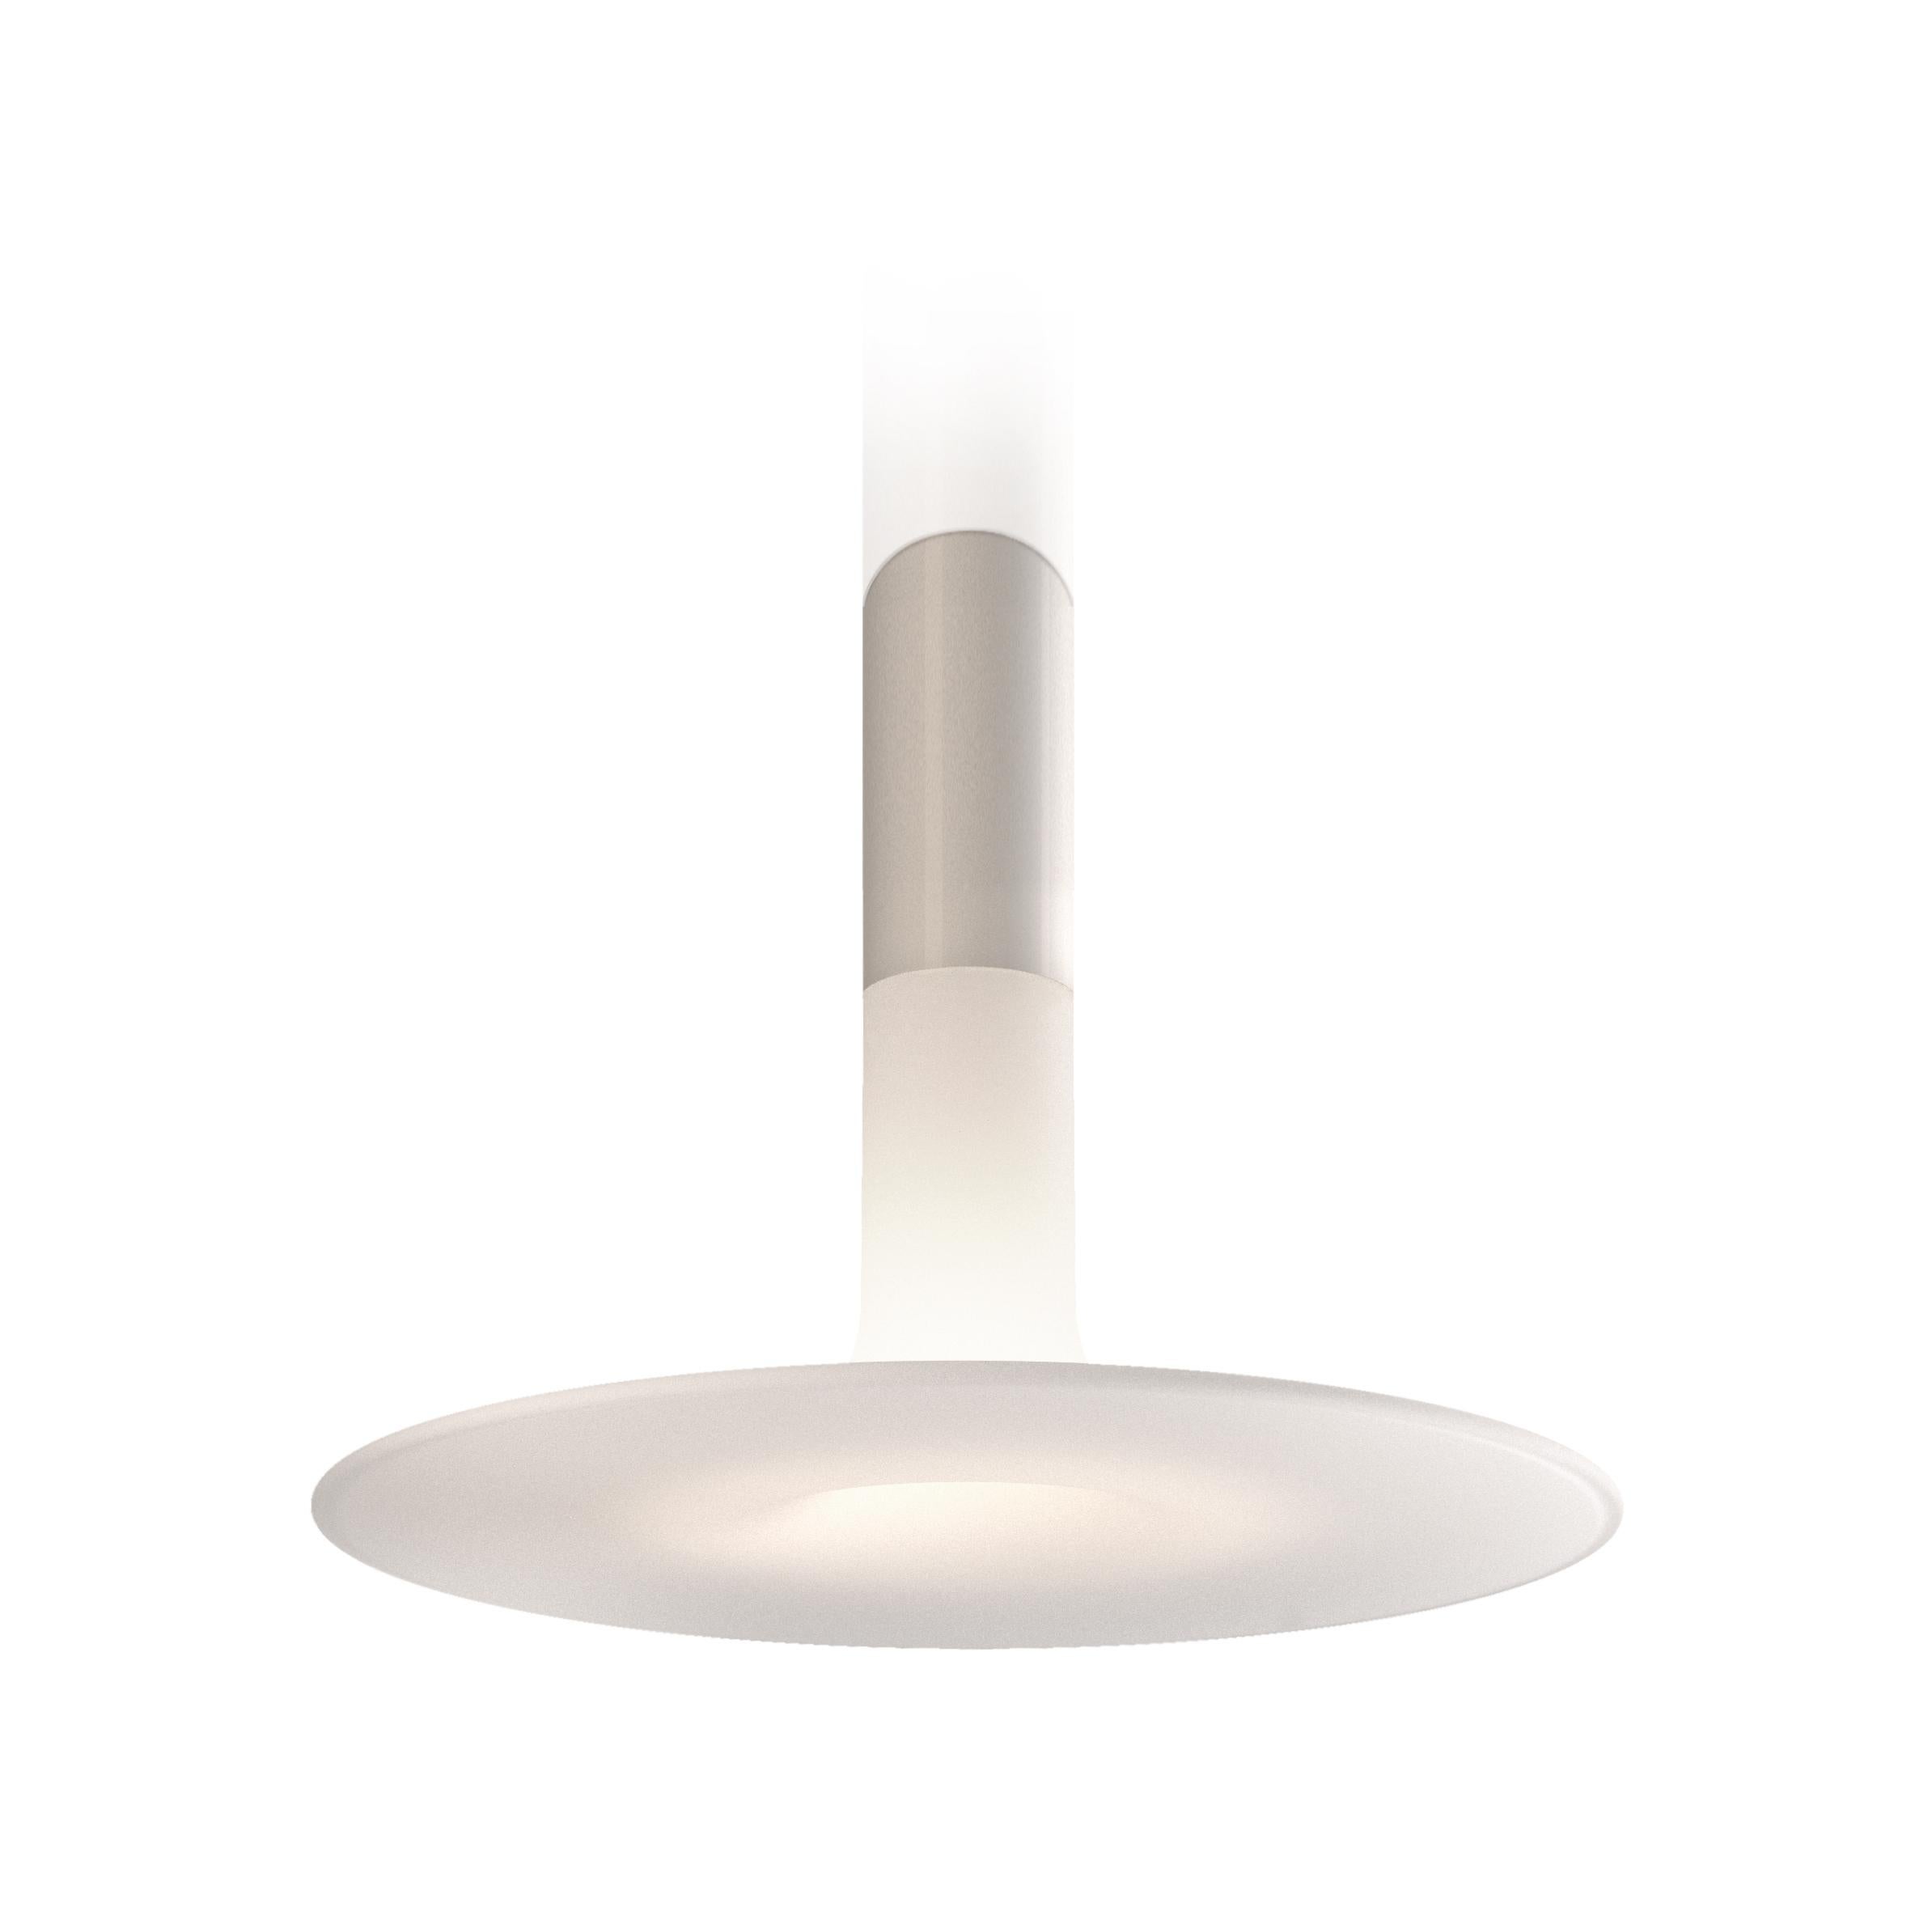 Contemporary 'Louis 34' Ceiling Lamp by Studio 14 for KDLN For Sale